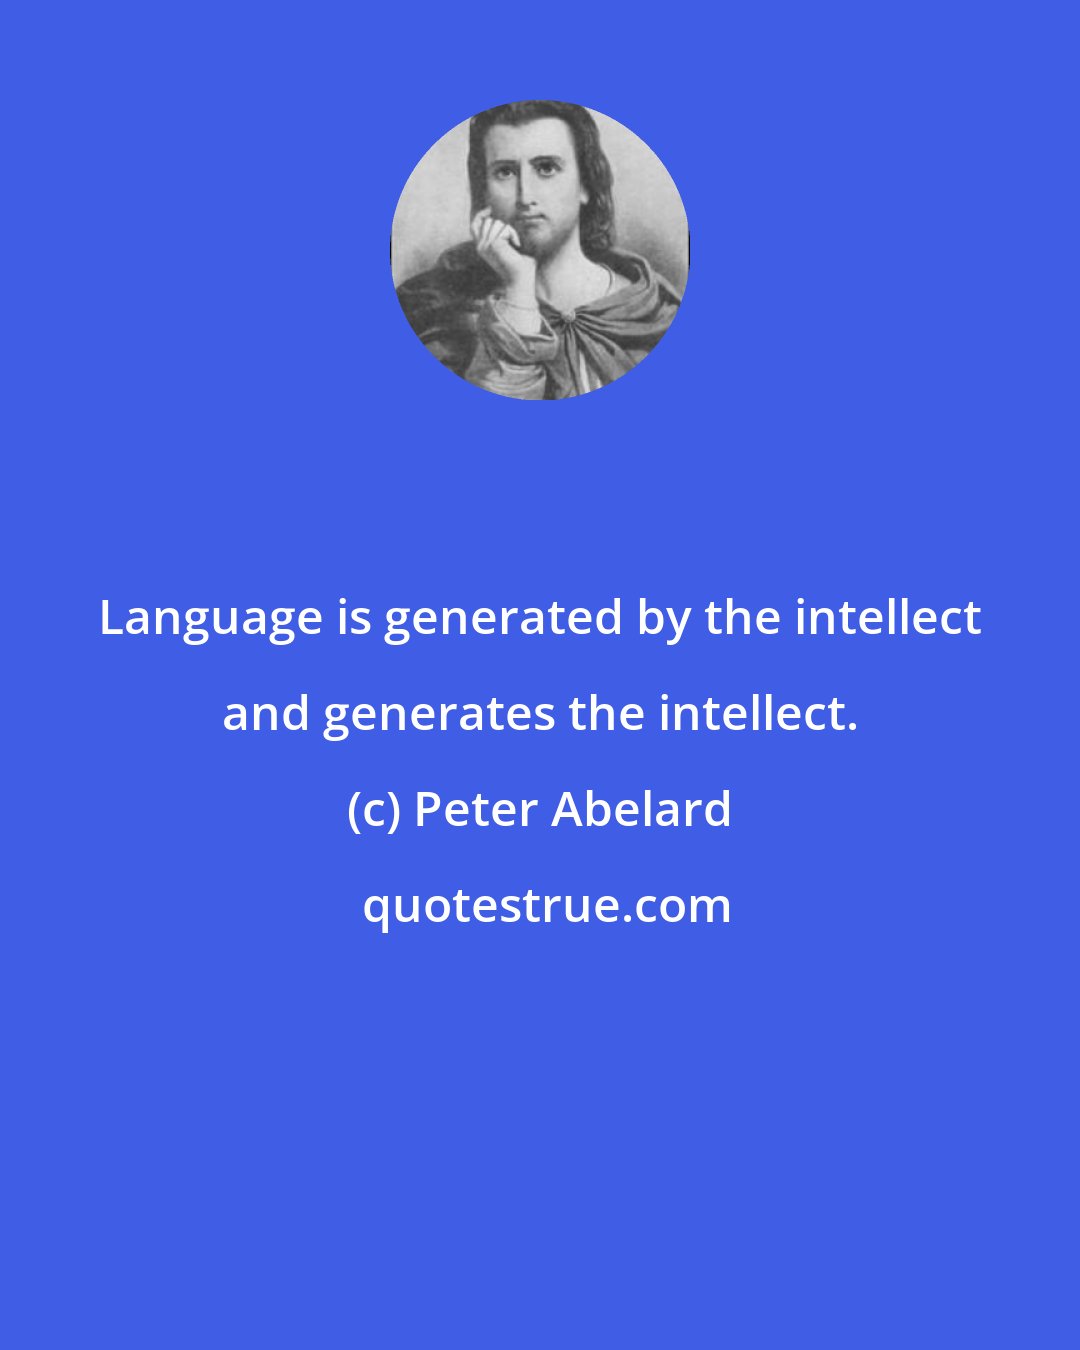 Peter Abelard: Language is generated by the intellect and generates the intellect.